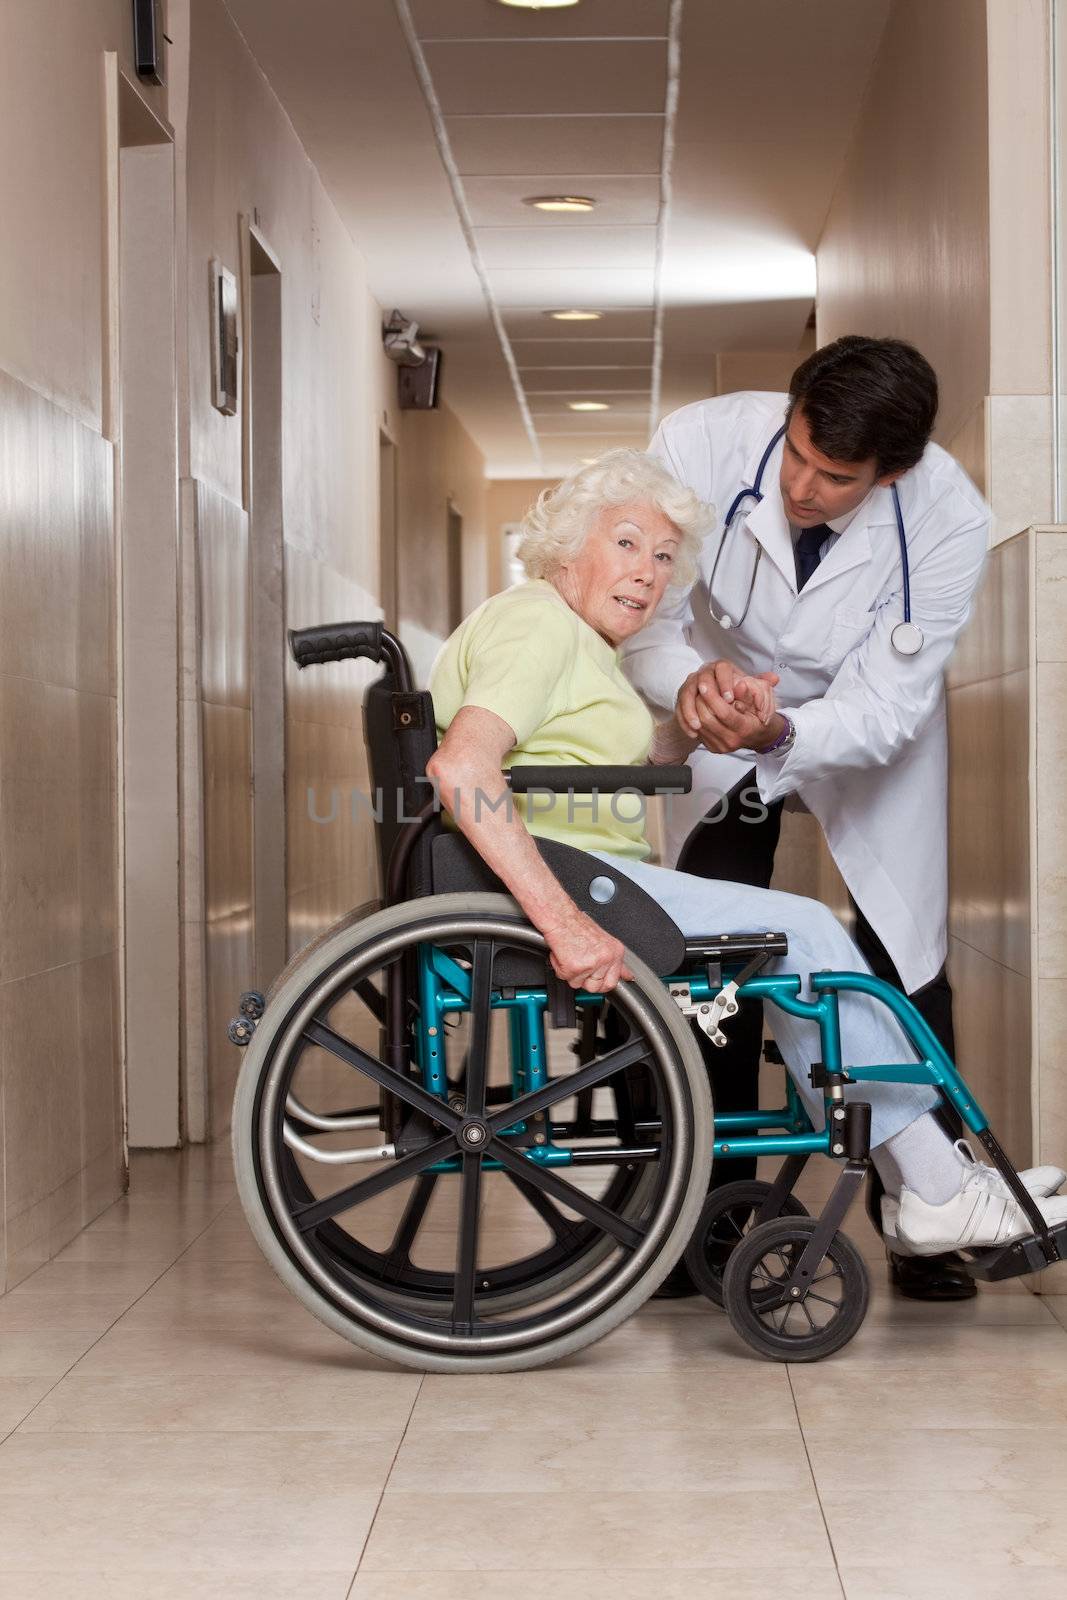 Doctor with Patient on Wheel Chair by leaf